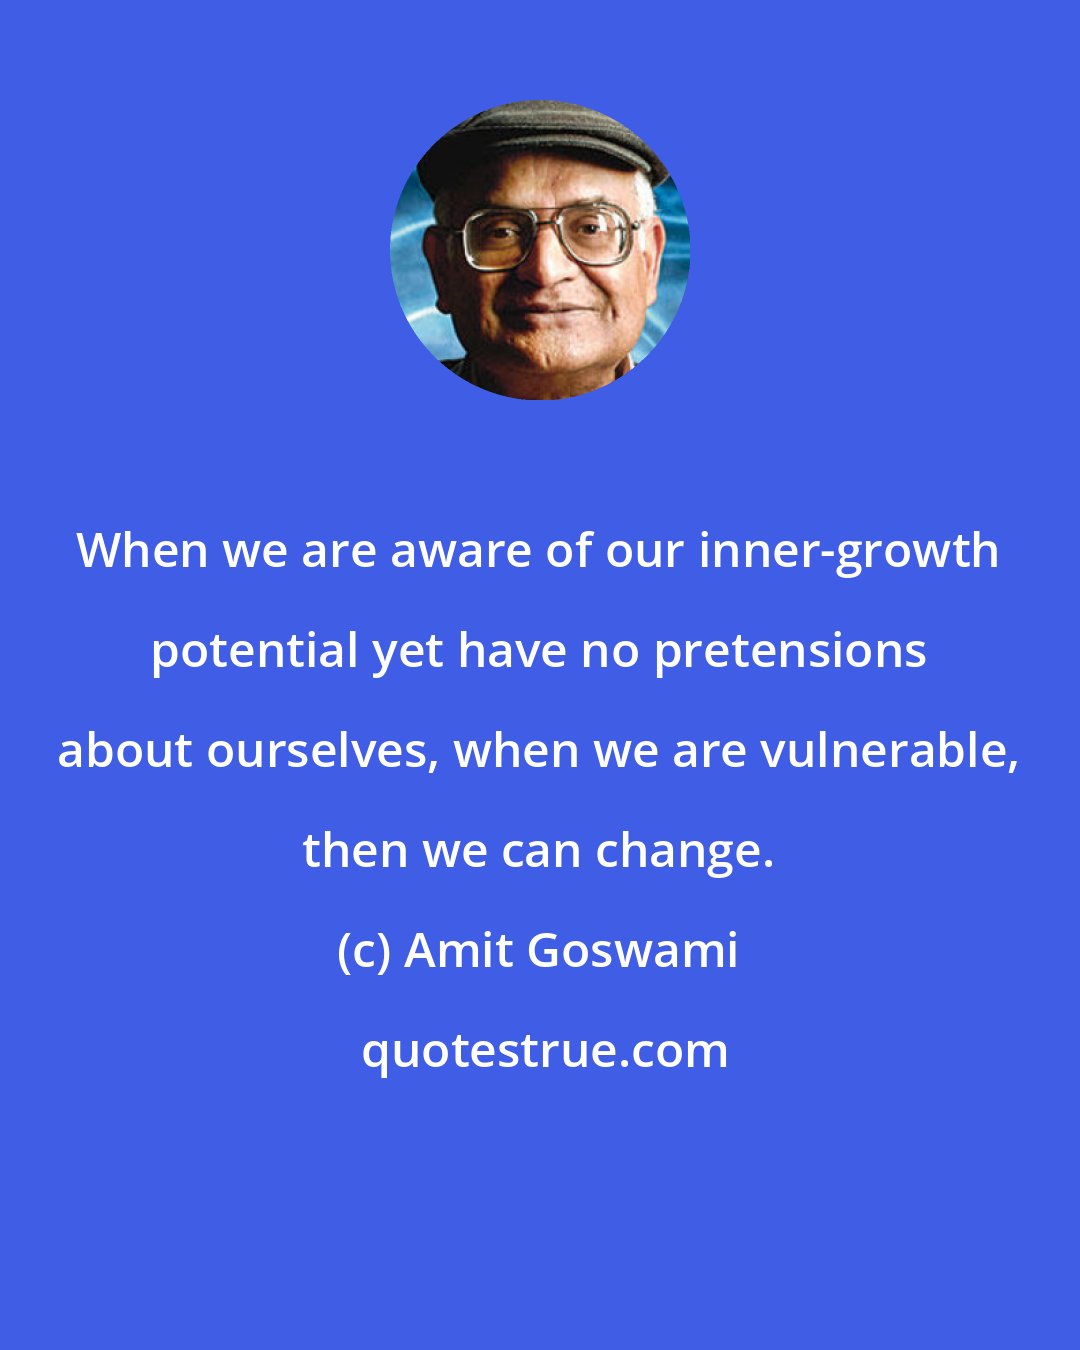 Amit Goswami: When we are aware of our inner-growth potential yet have no pretensions about ourselves, when we are vulnerable, then we can change.